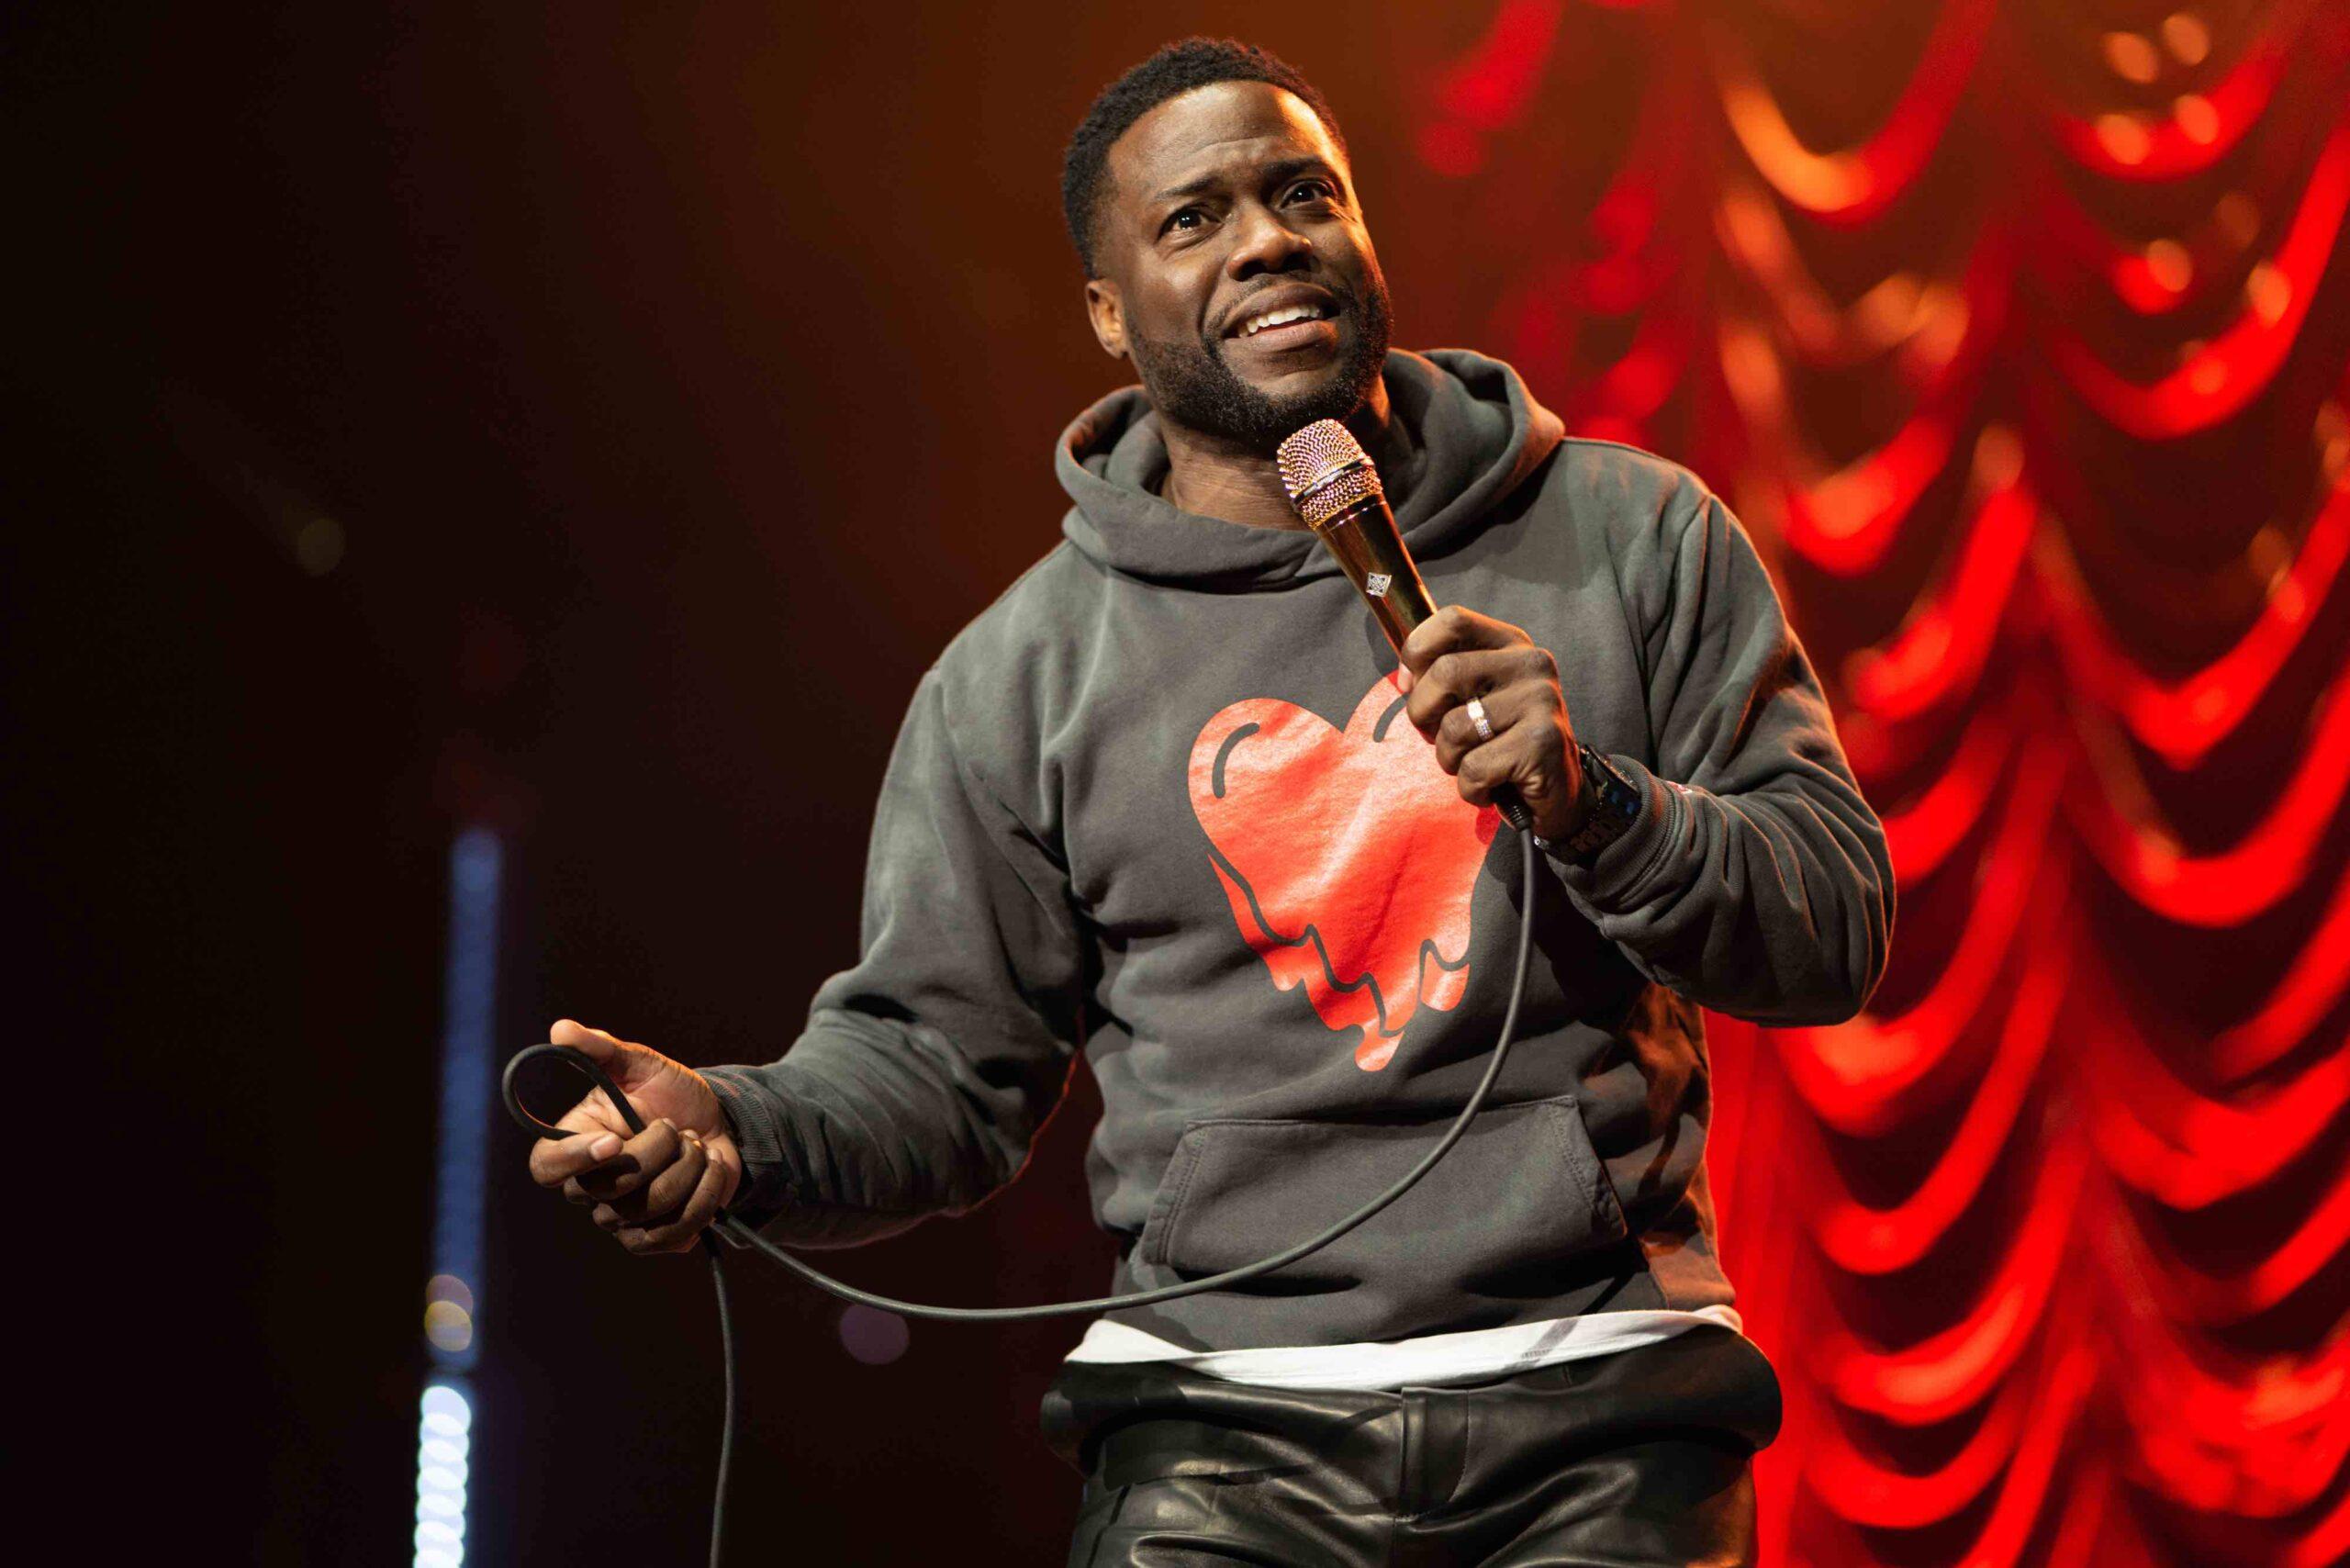 Upcoming UAE comedy shows: From Aziz Ansari to Kevin Hart